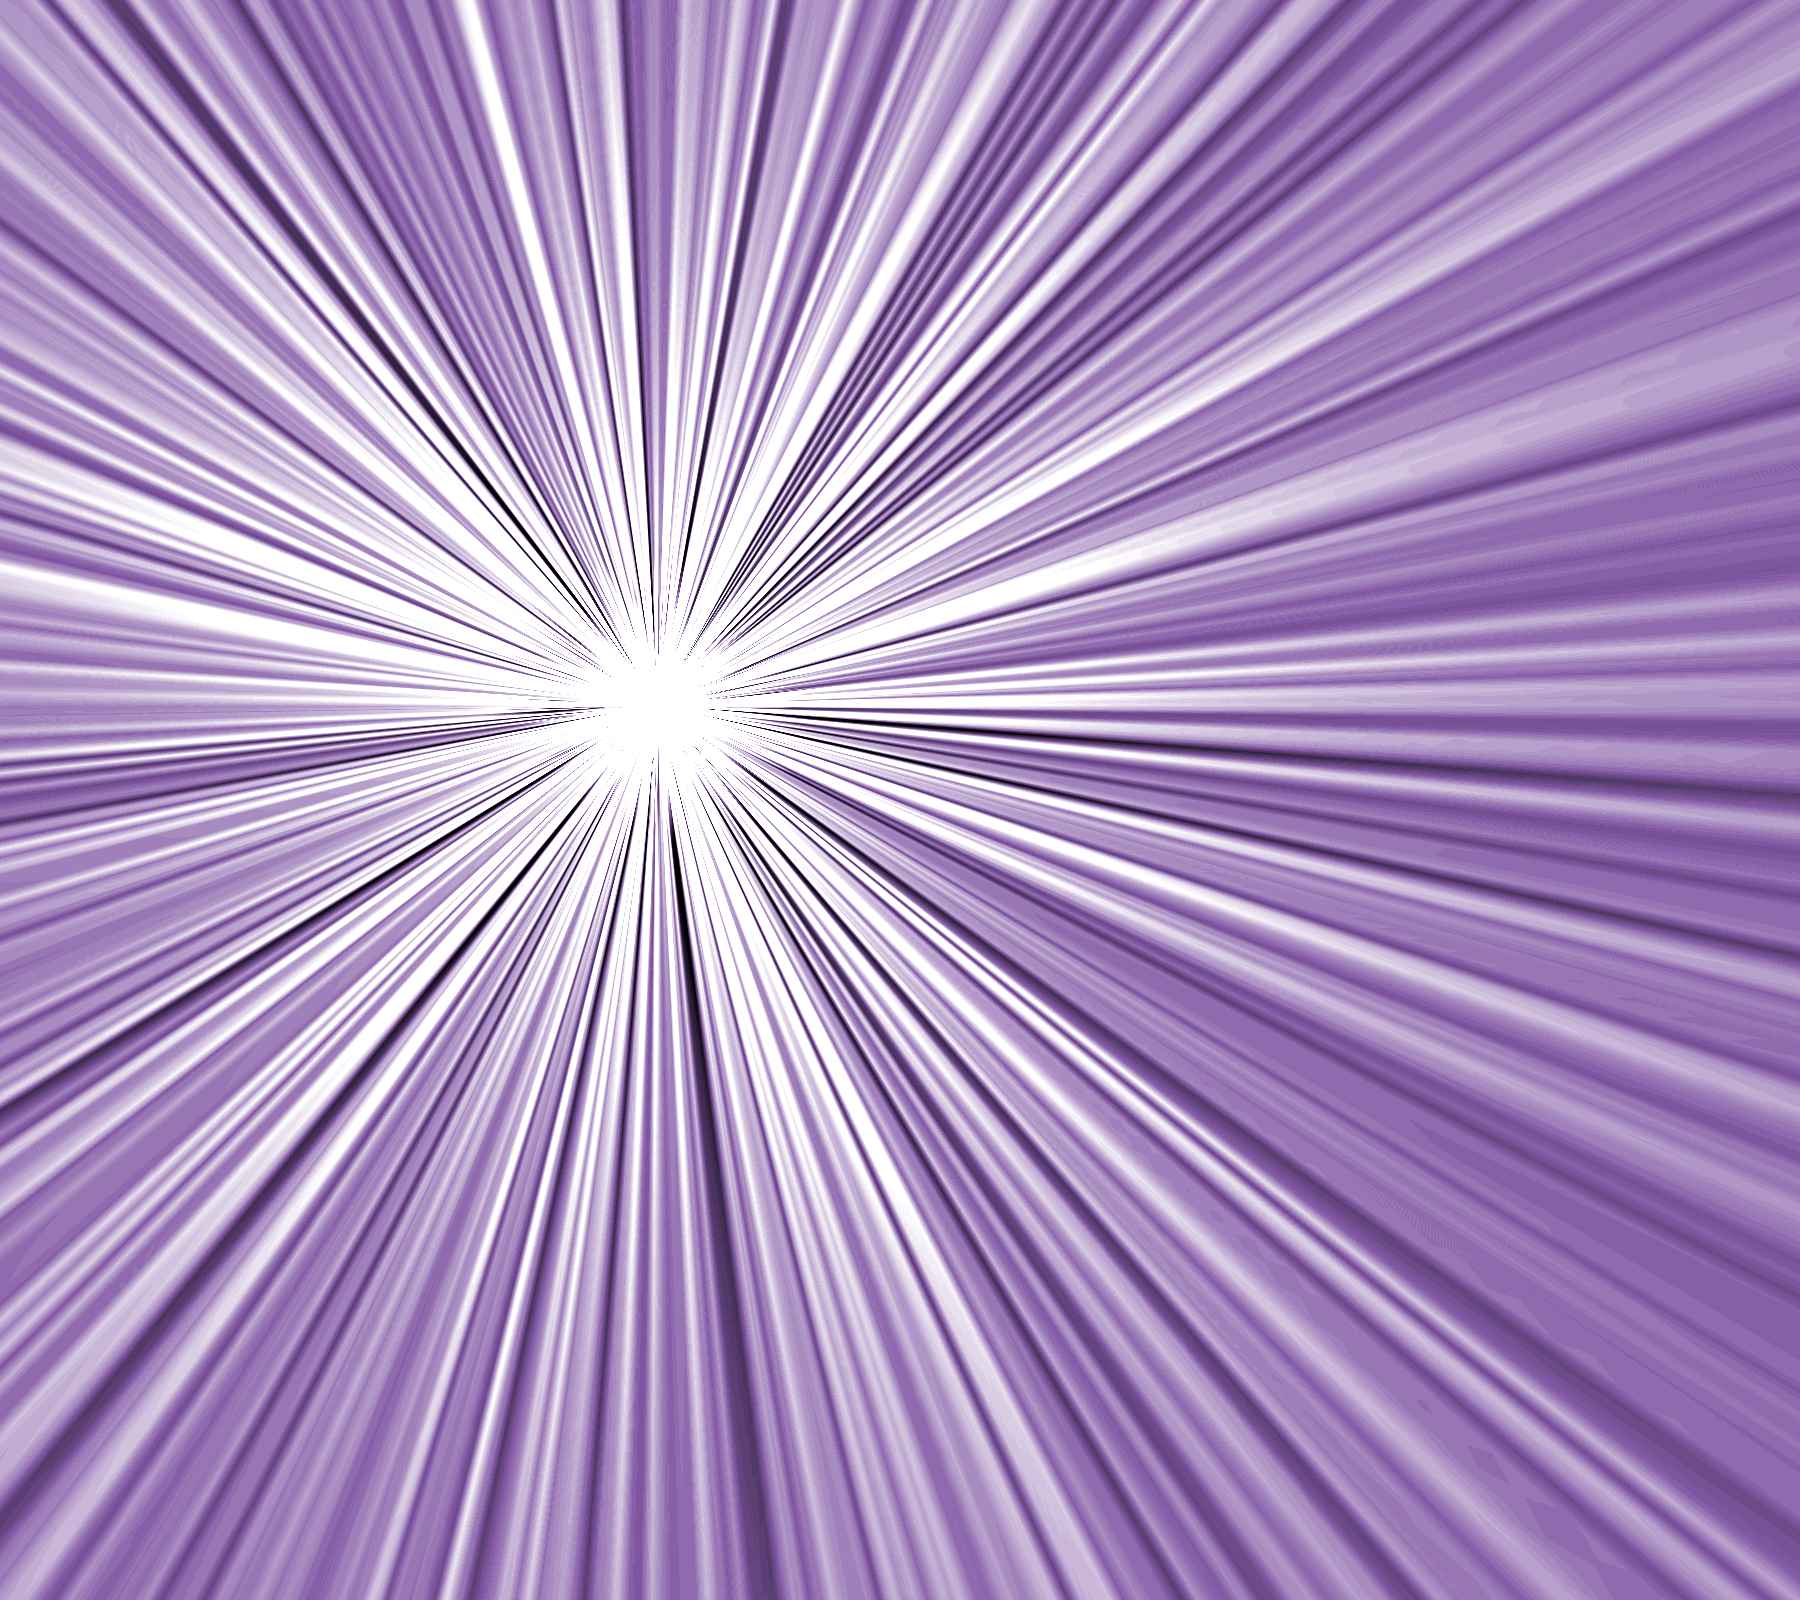 Muted Purple Starburst Radiating Lines Background HD Wallpapers Download Free Images Wallpaper [wallpaper981.blogspot.com]